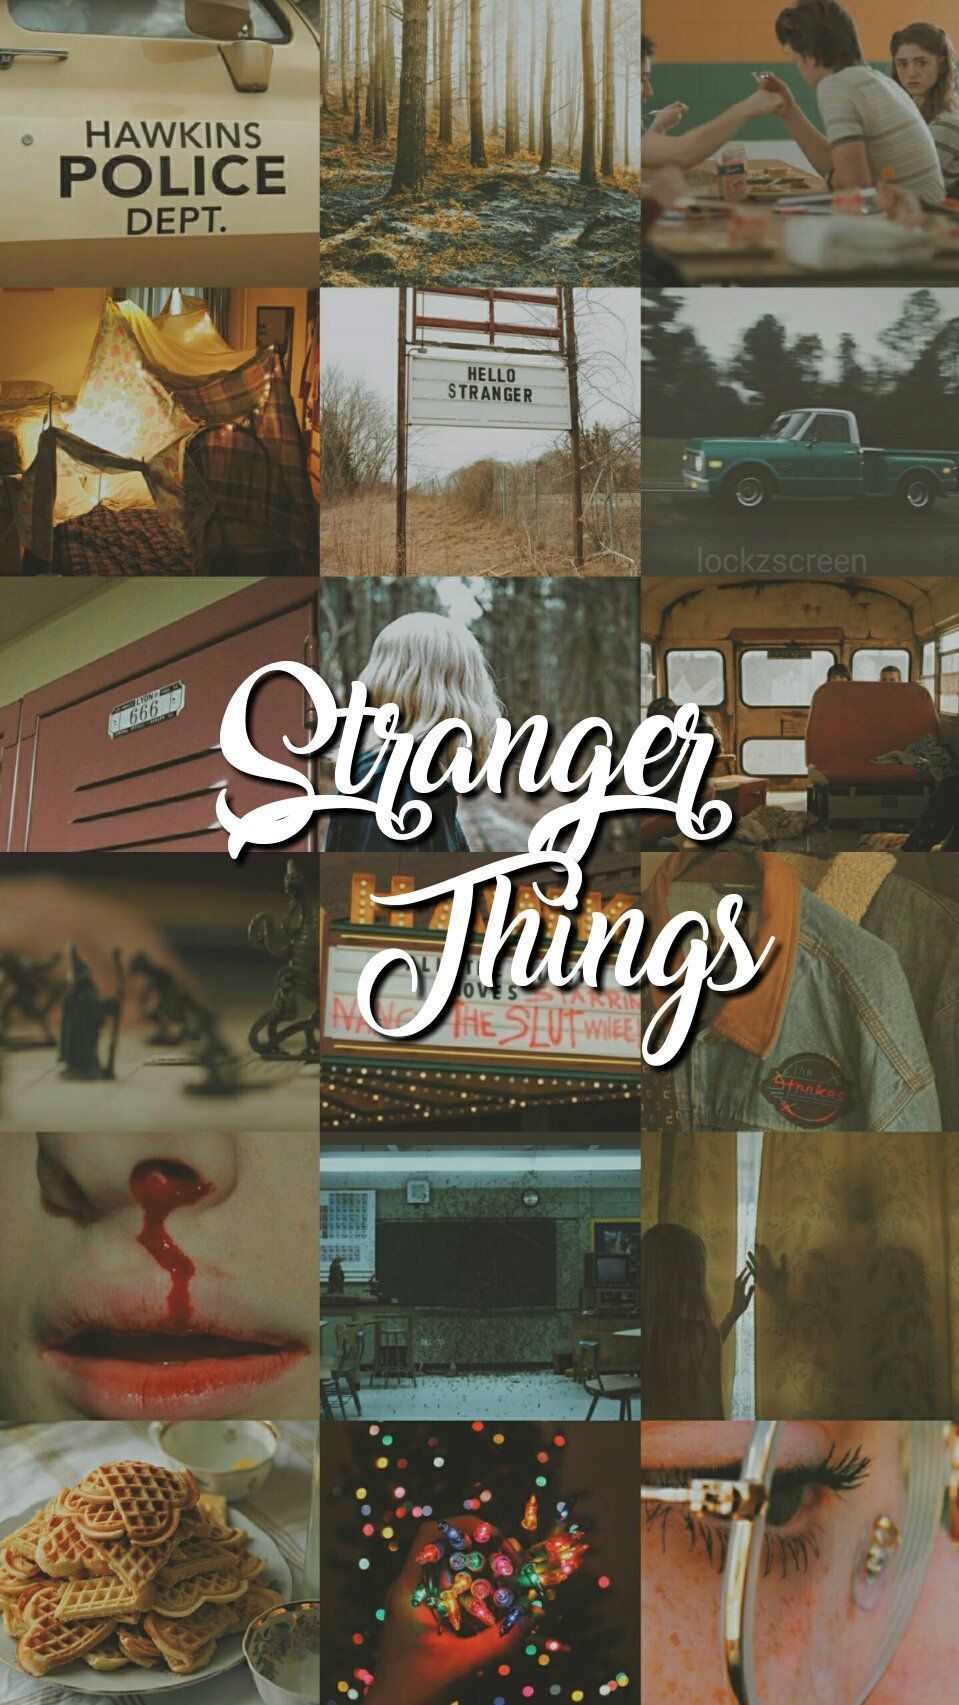 Stranger Things Aesthetic wallpaper I made! Credit to the creators of the pictures used. - Stranger Things